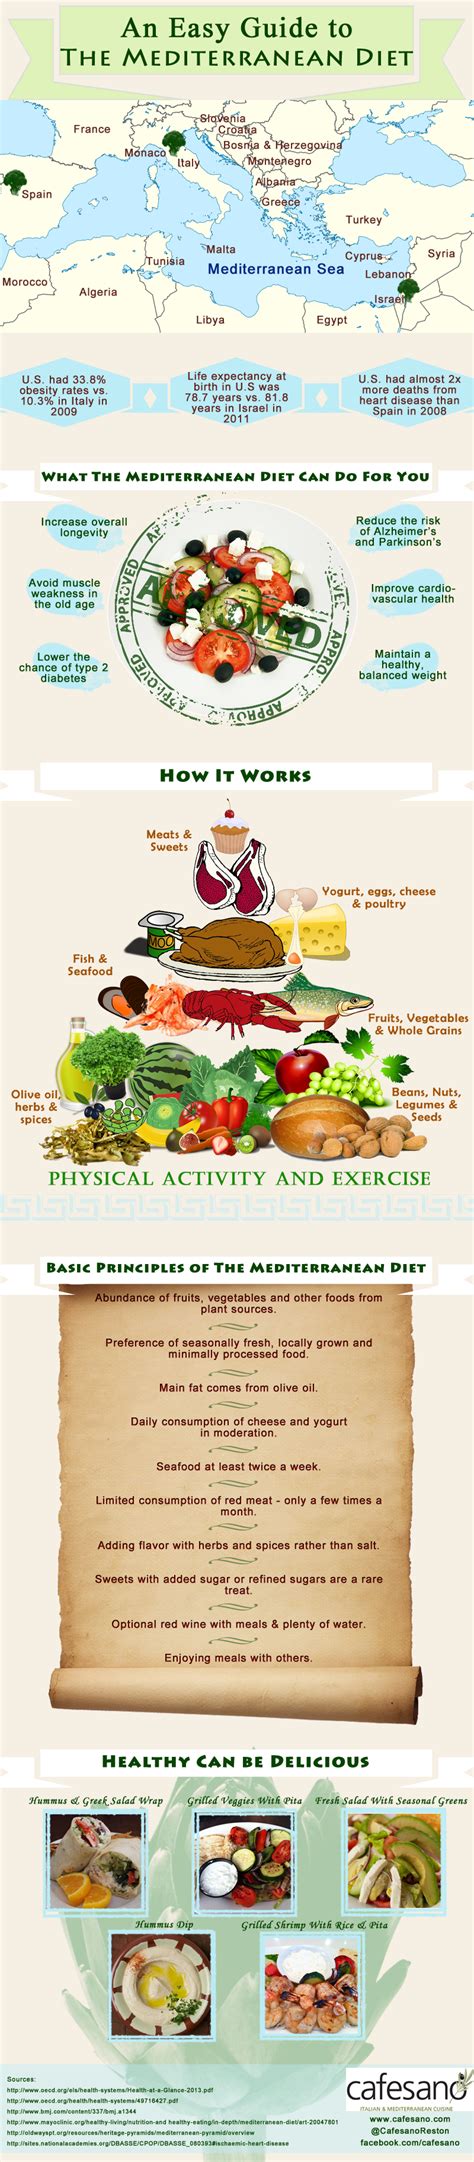 An Easy Guide To The Mediterranean Diet Infographic